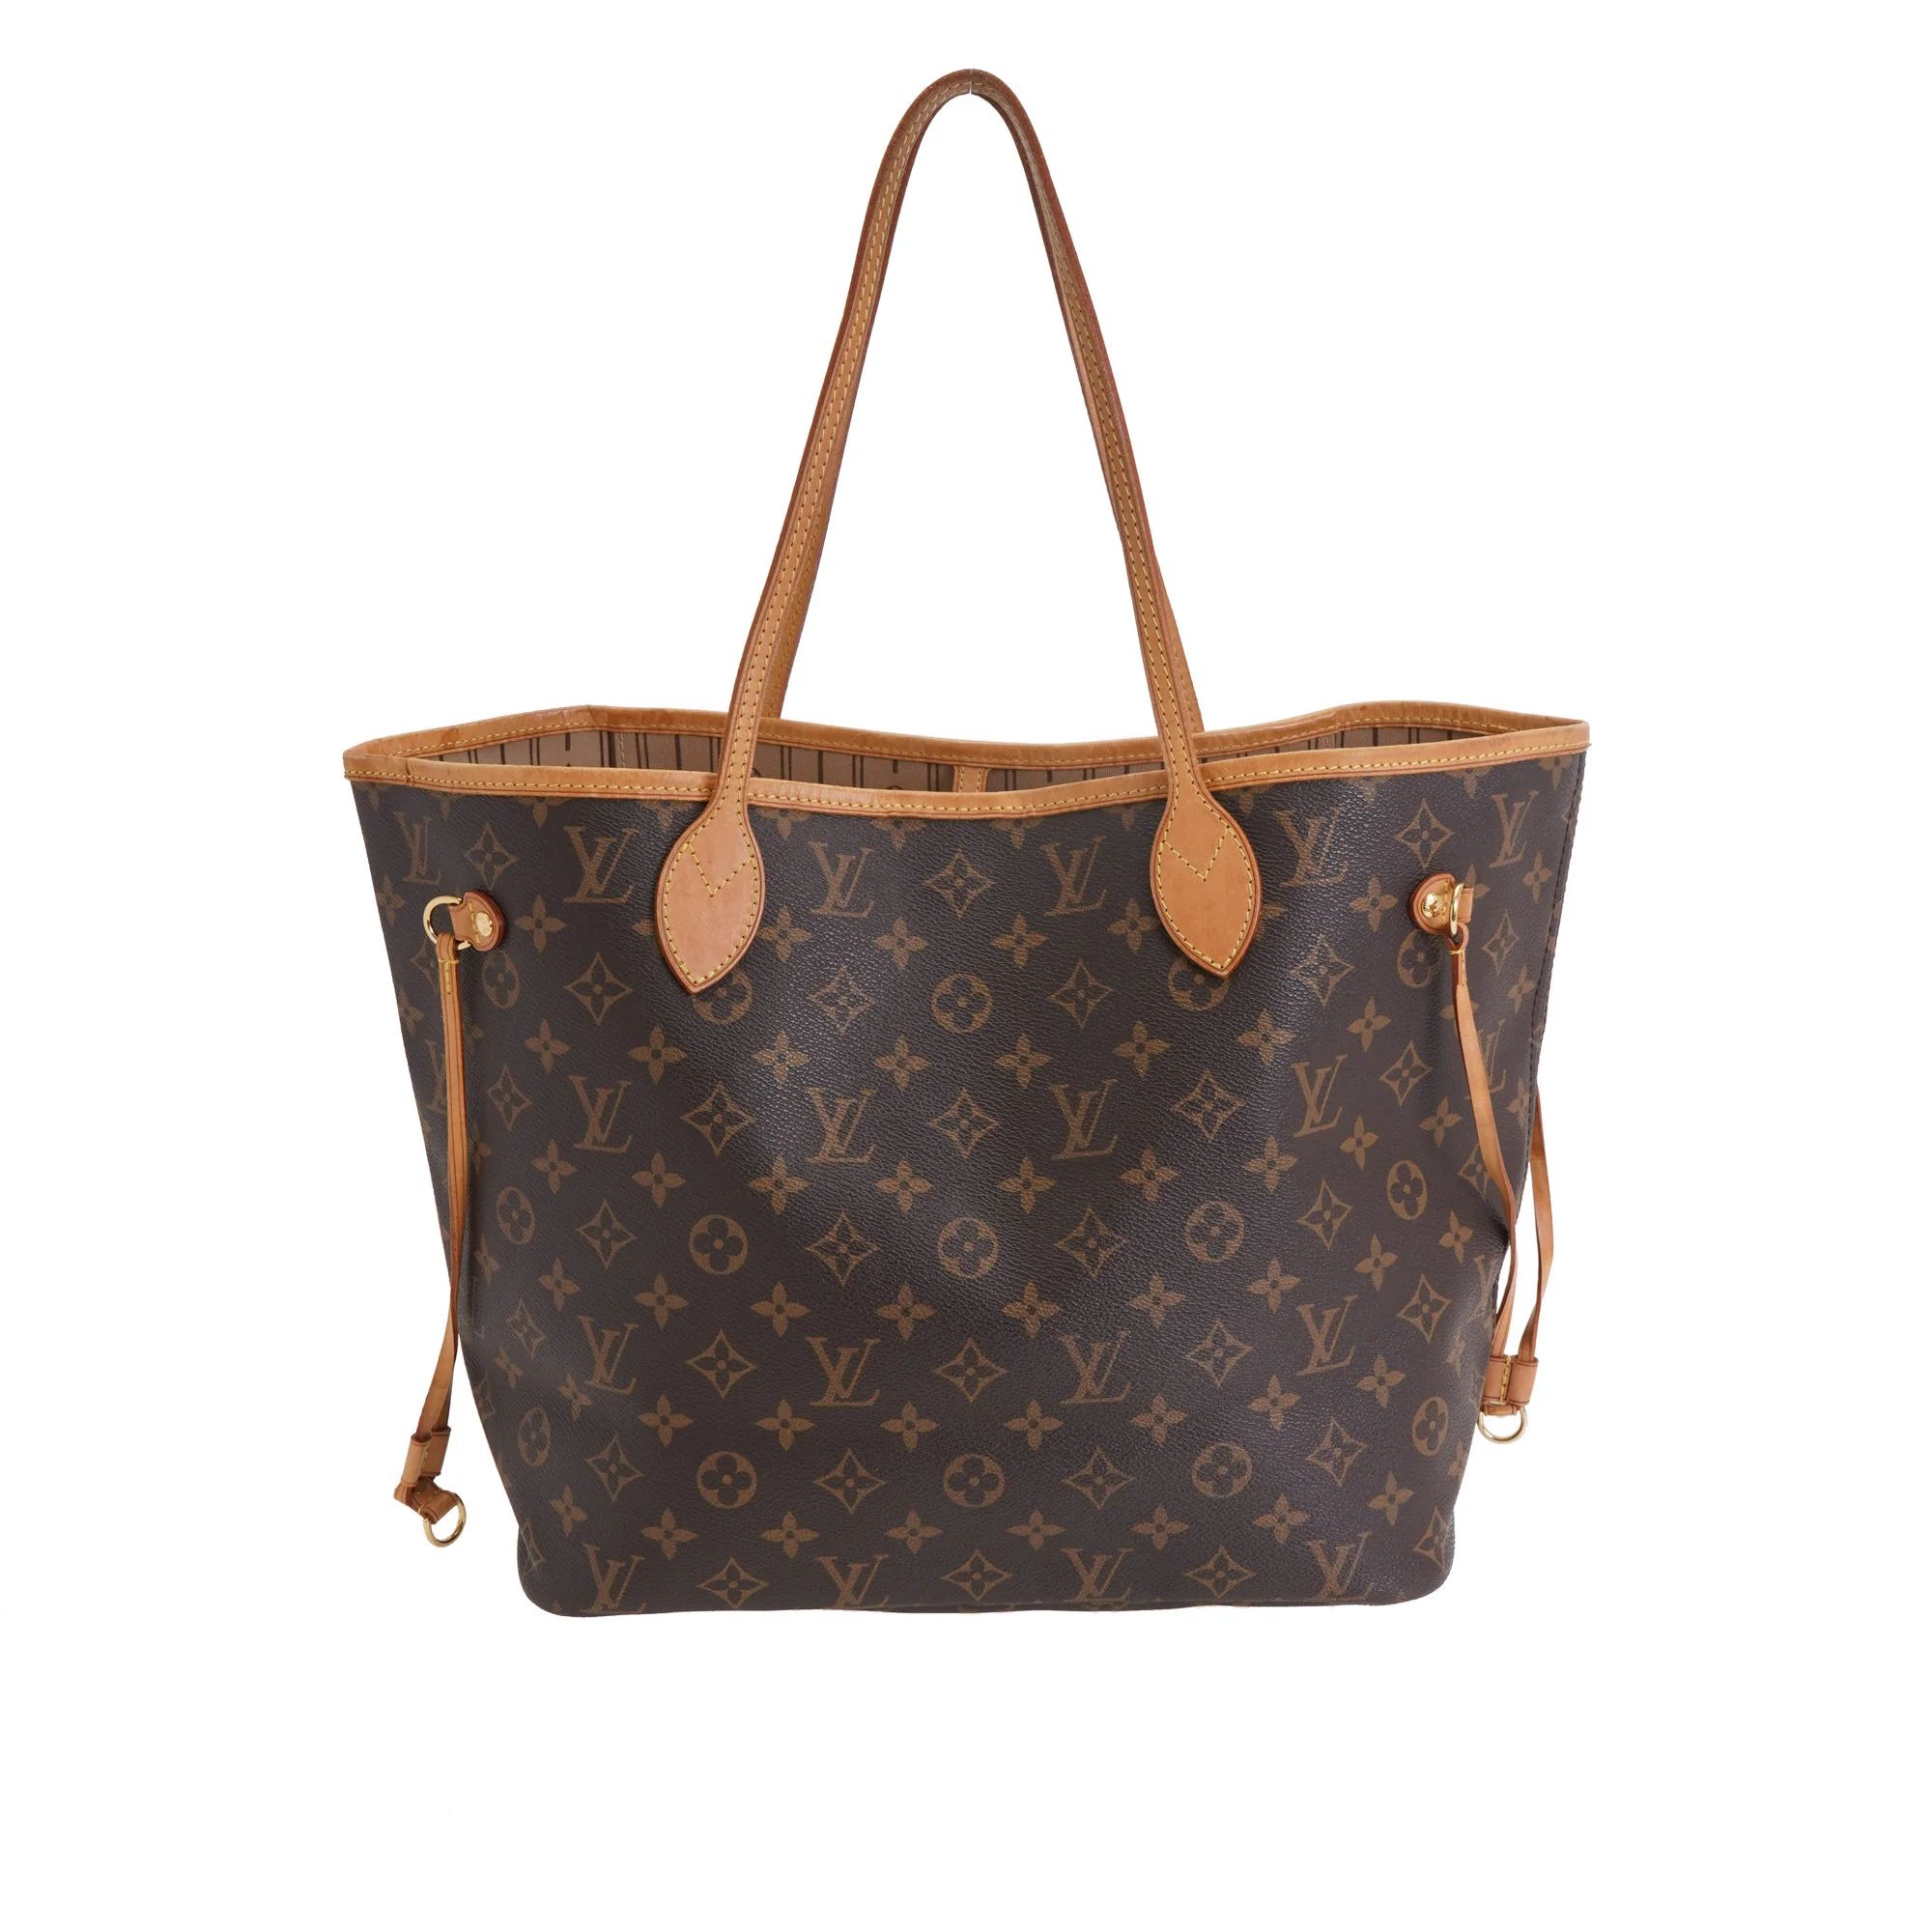 Louis Vuitton Neverfull MM Bag in Brown Lord & Taylor | Lord & Taylor